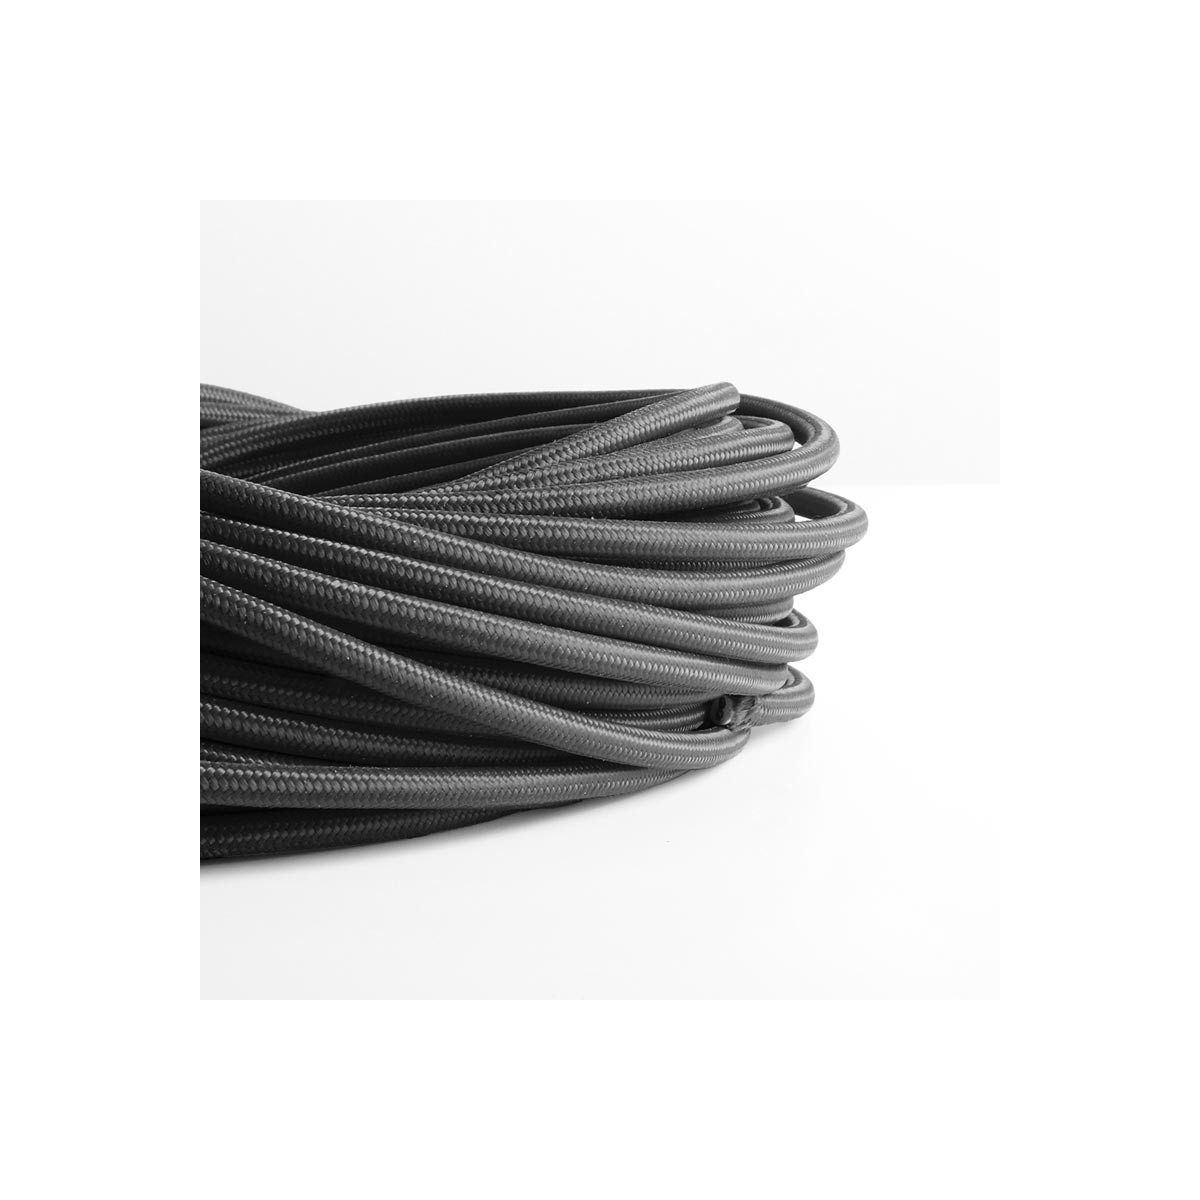 Electric cable coated with Algodão Preto